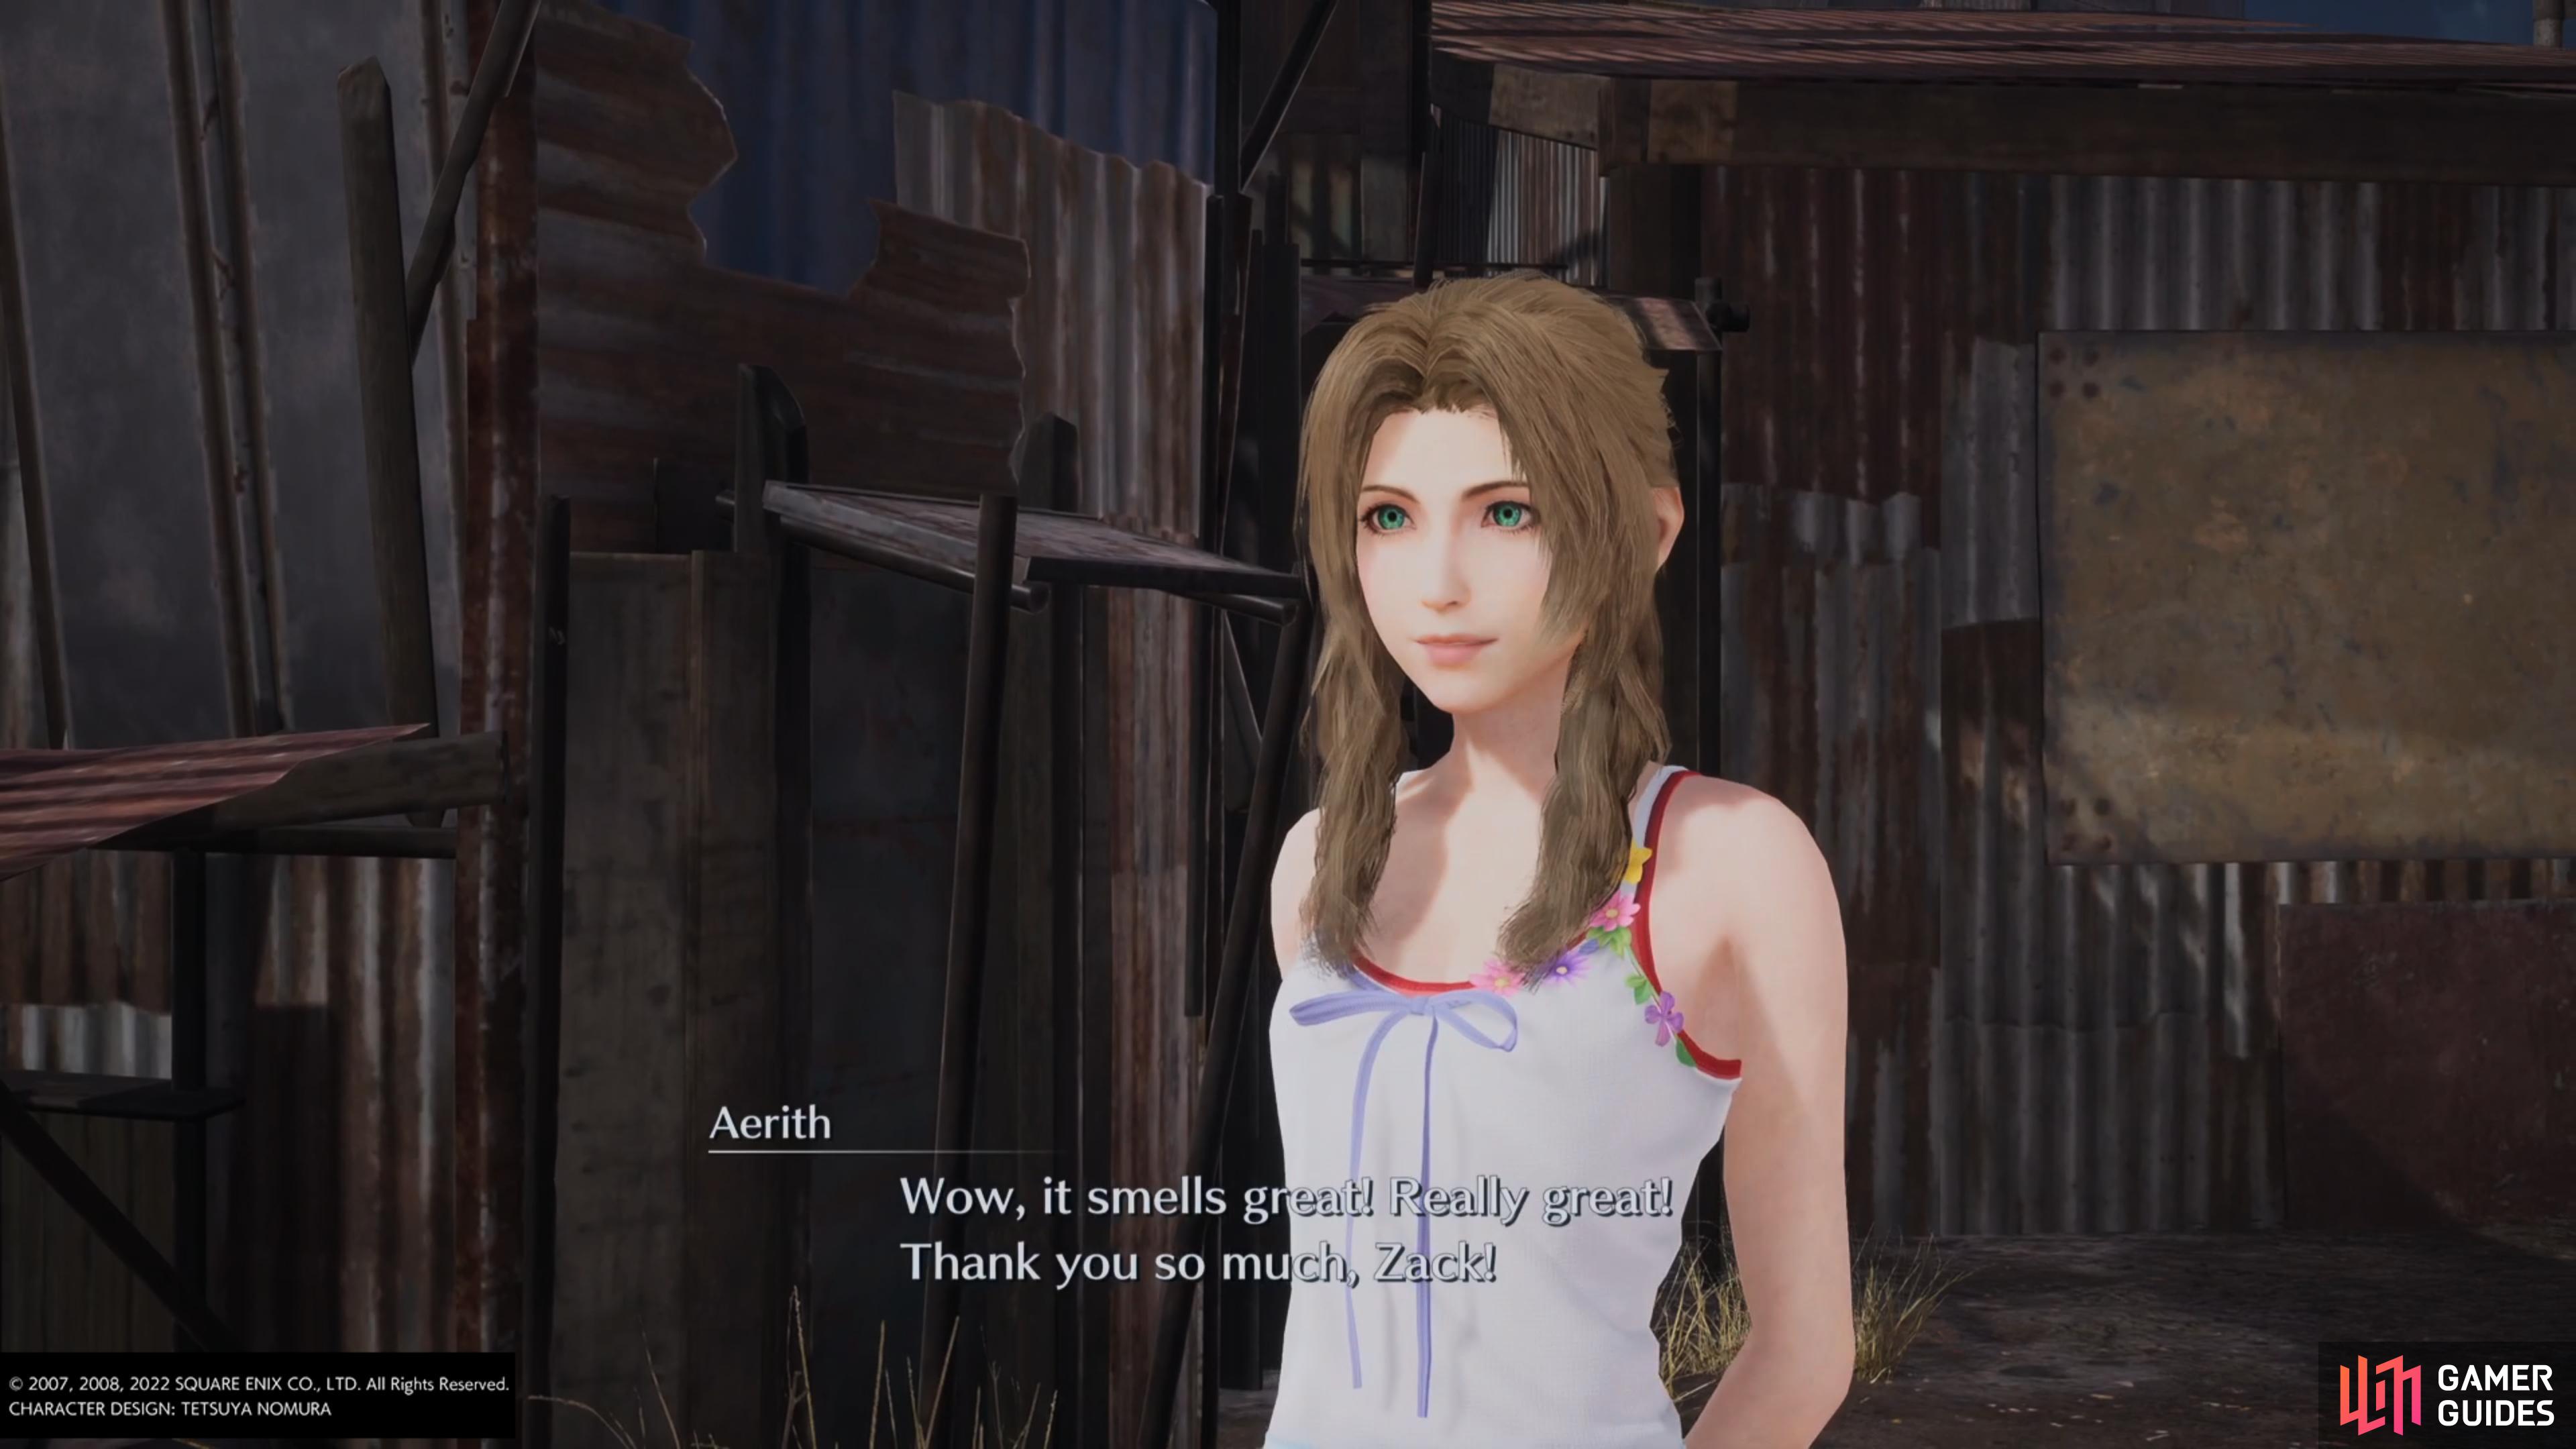 You will need to blend the perfect perfume to increase Aerith’s affection in chapter 4.